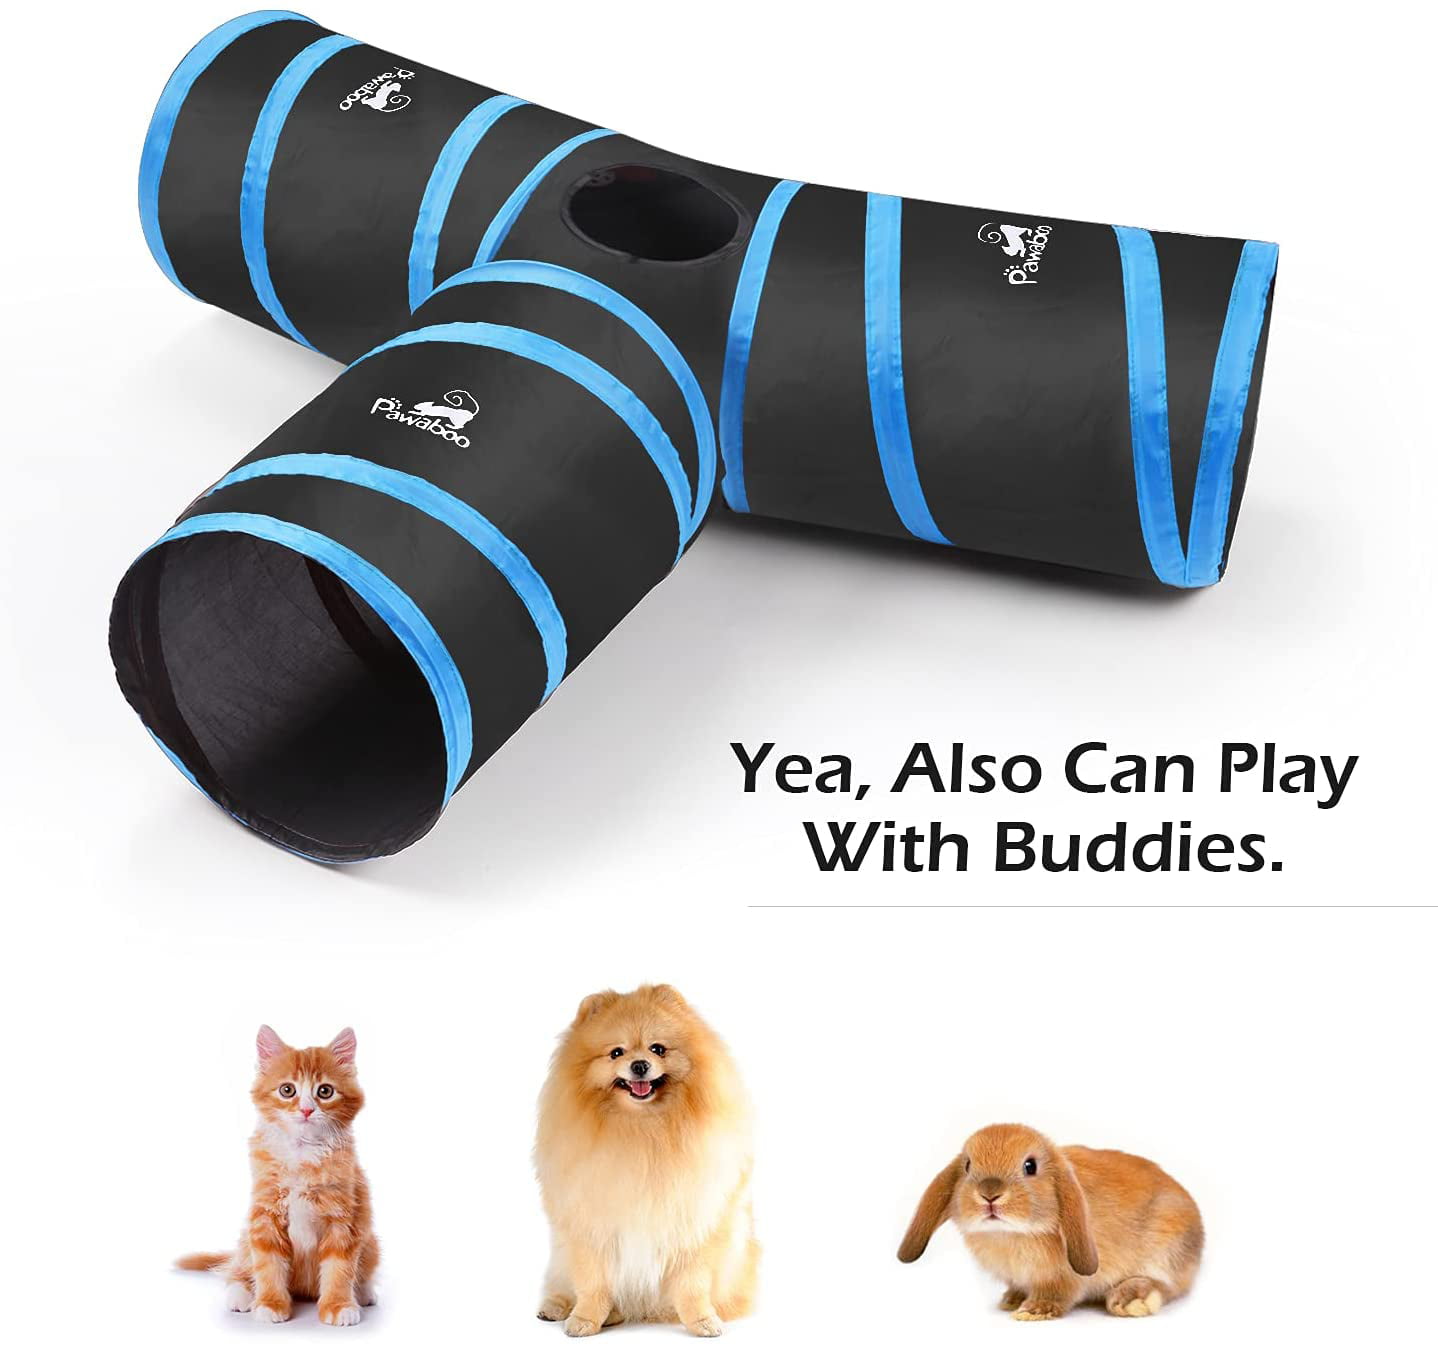 Pawaboo Cat Toys Blue Cat Tunnel Tube 4 Way Tunnels 25x53cm Extensible Collapsible Cat Play Tent Interactive Toy Maze Cat House with Balls and Bells for Cat Kitten Kitty Rabbit Small Animal 